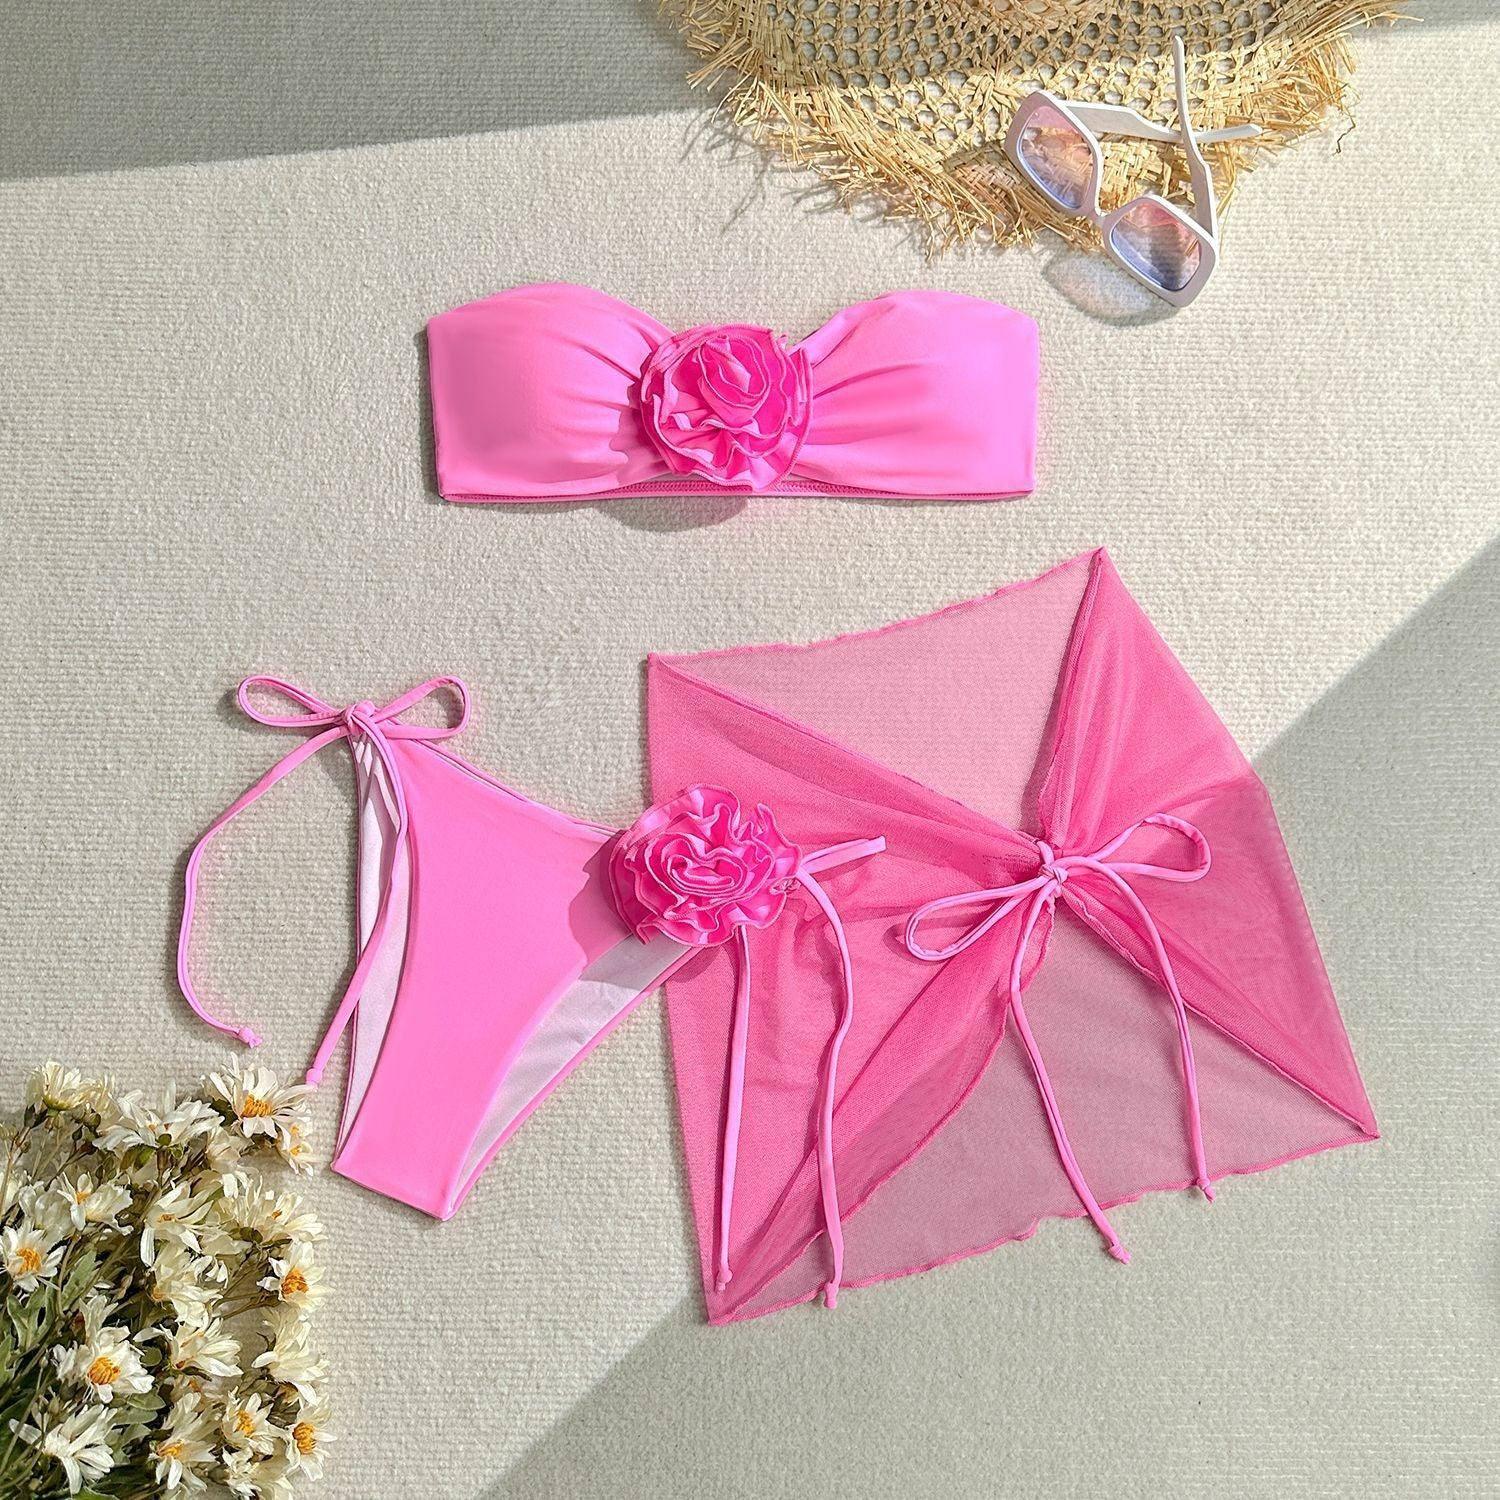 Women's Tube Top With Three-dimensional Big Flower Tied-Pink-6